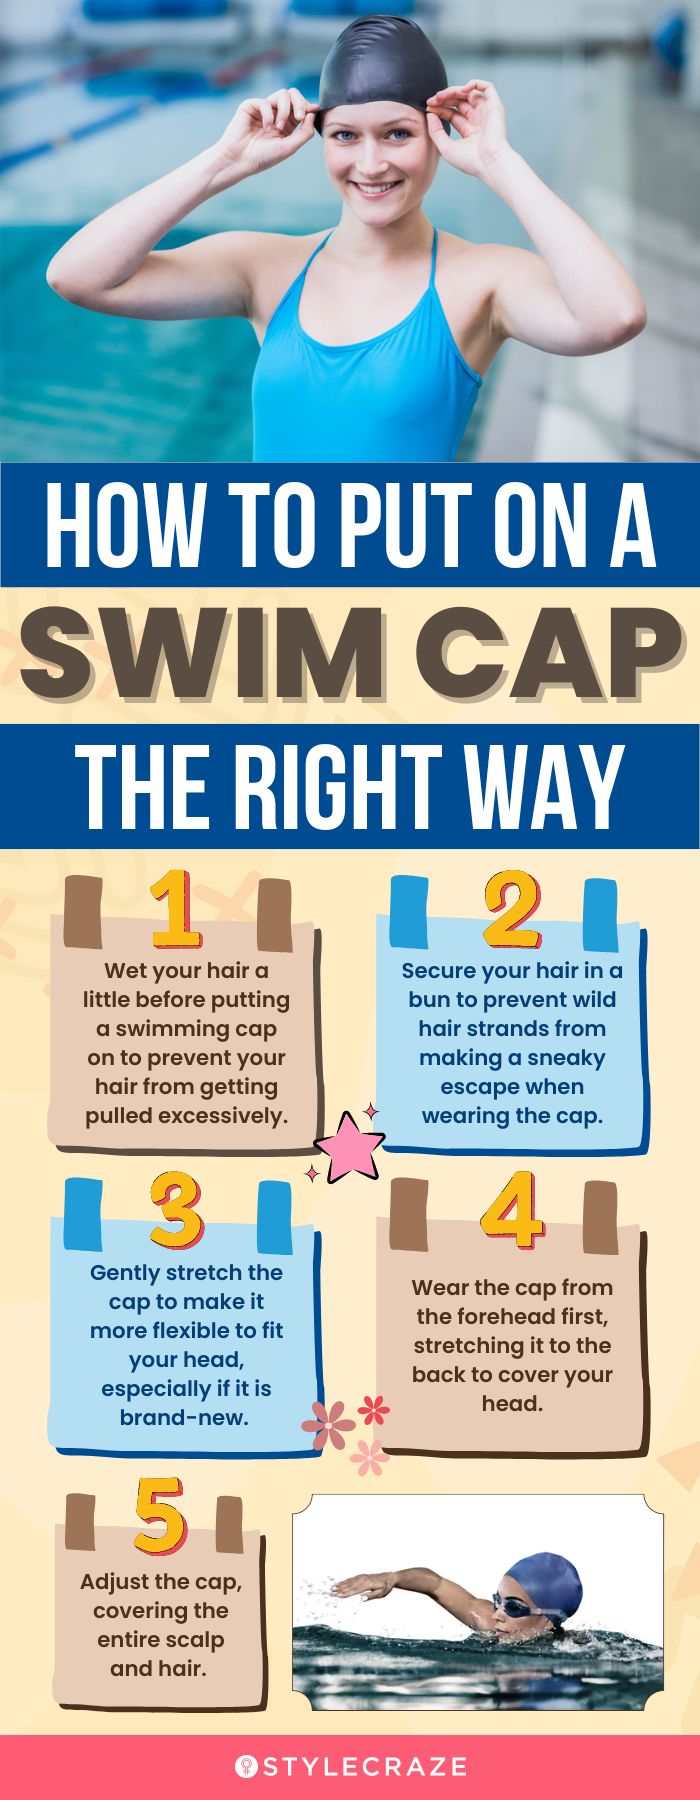 How To Put On A Swim Cap The Right Way (infographic)